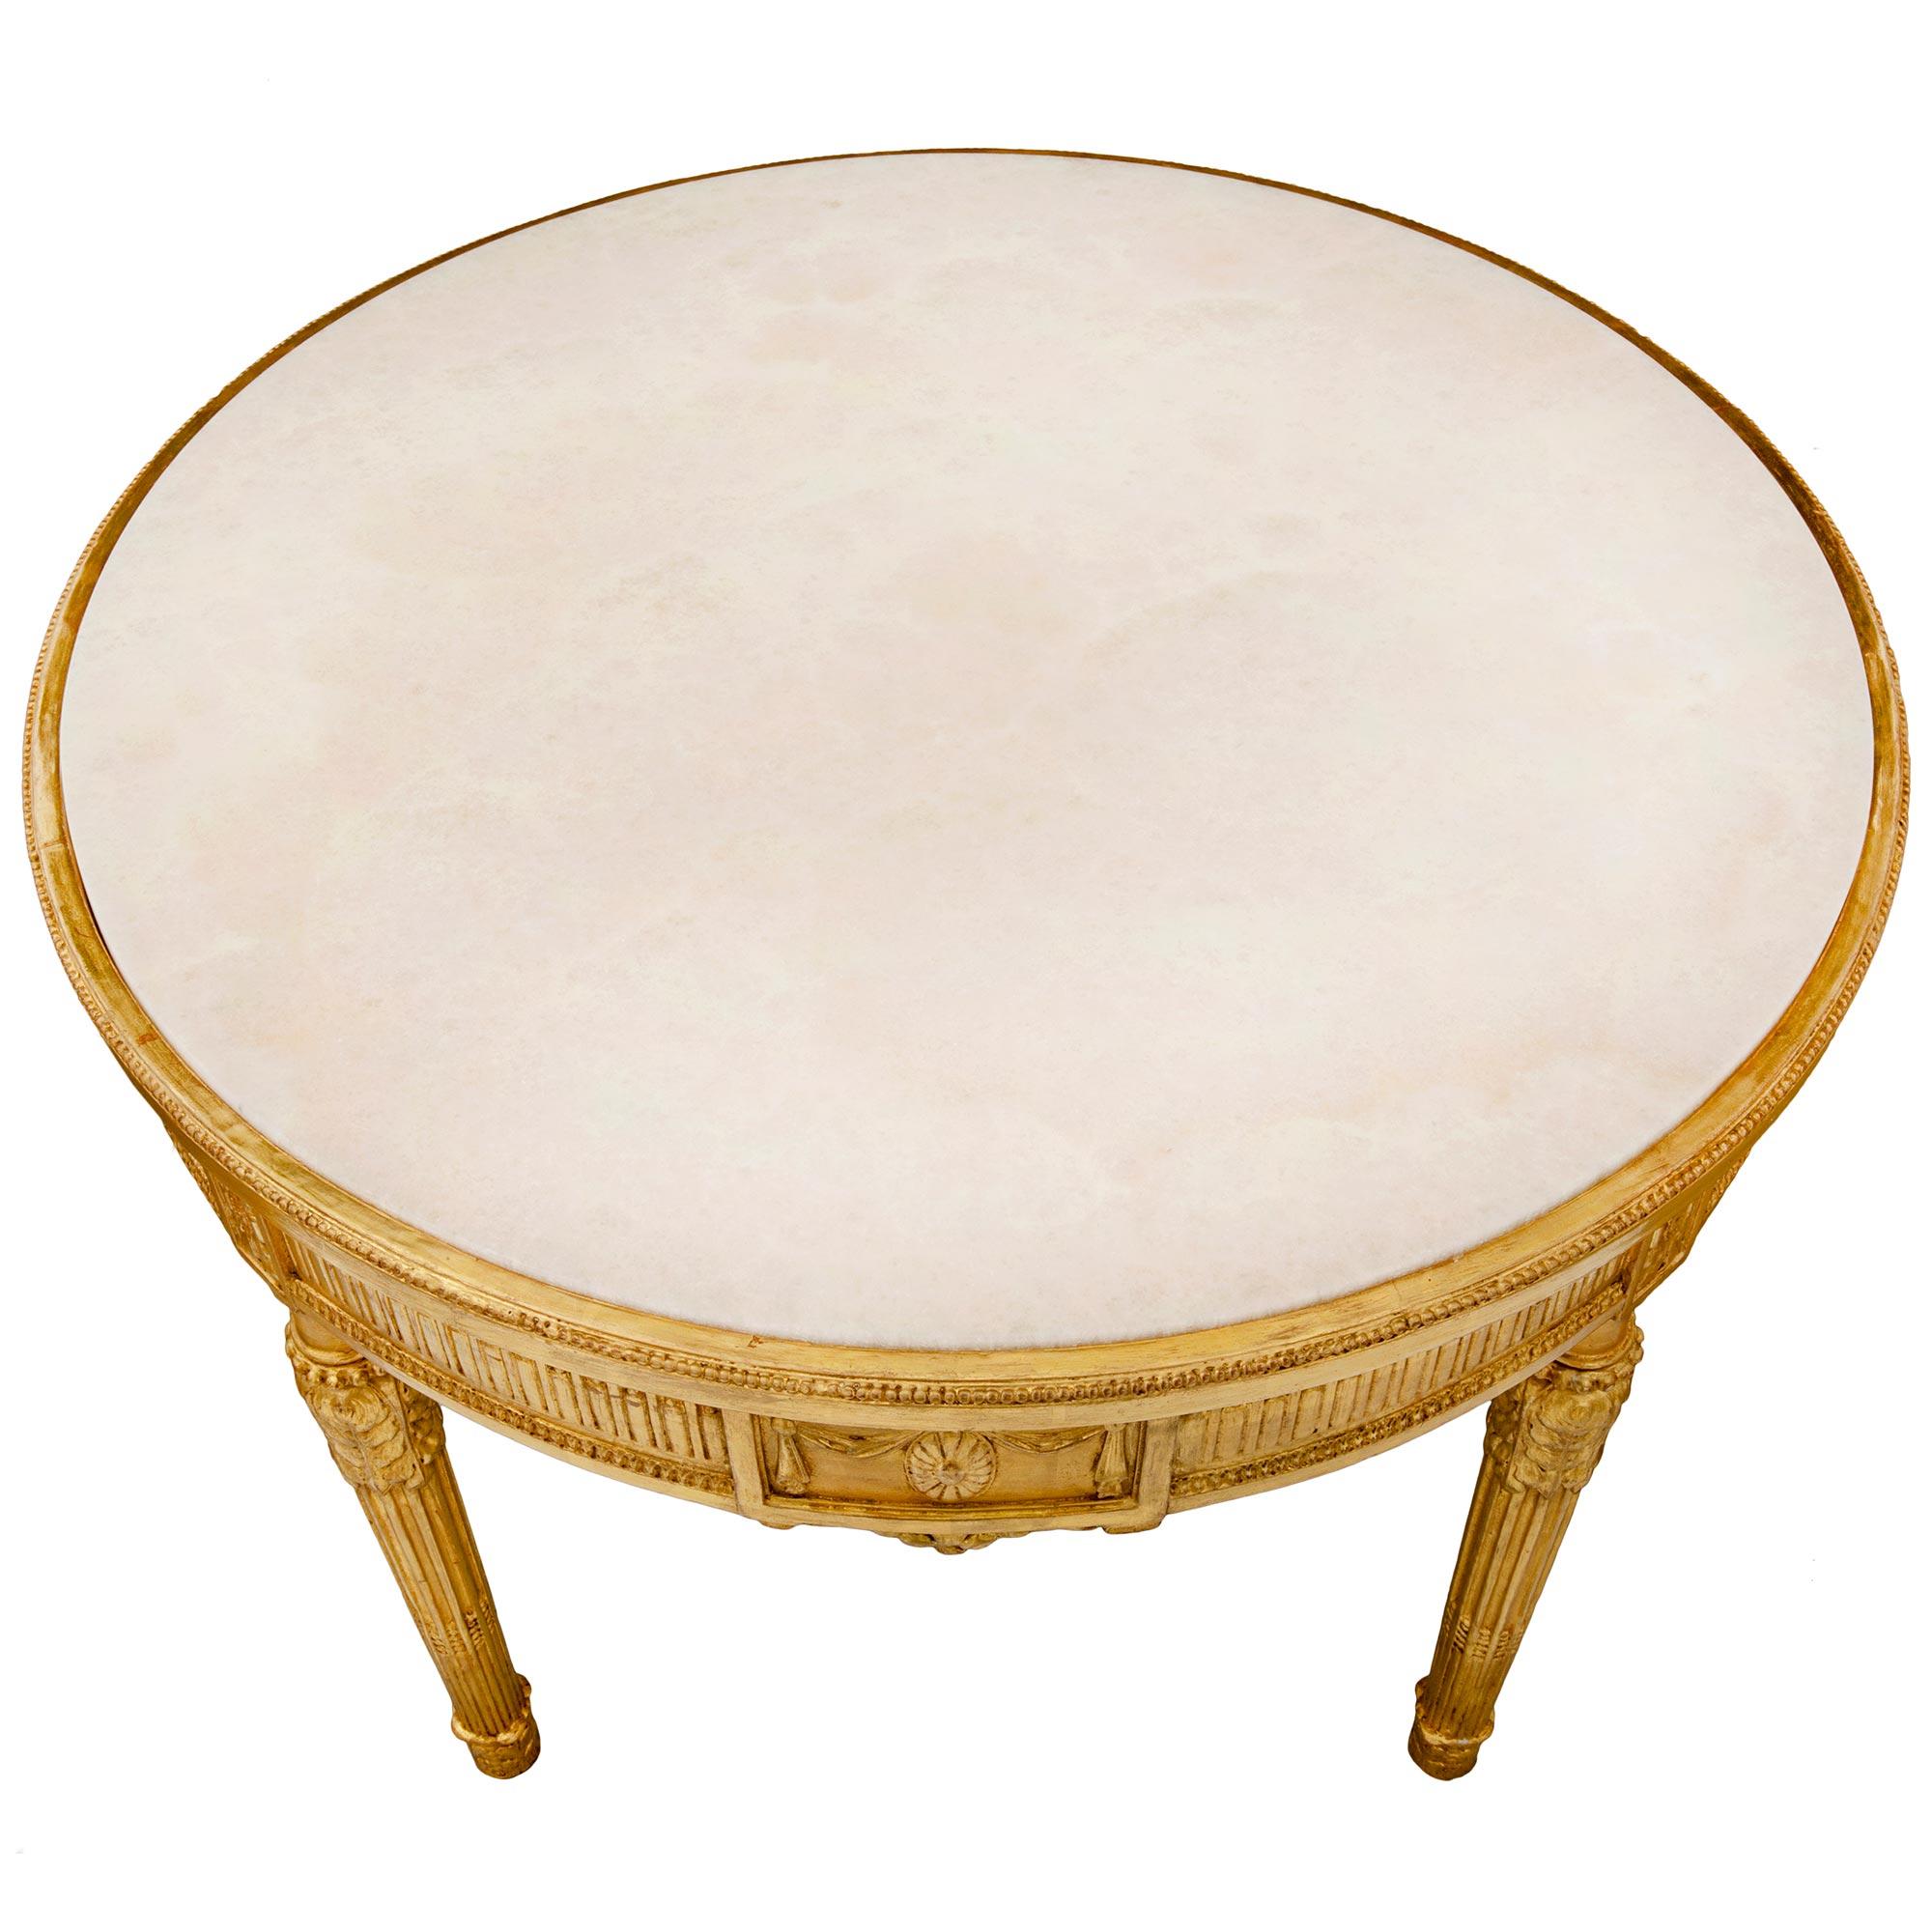 A beautiful Italian 19th century Louis XVI style giltwood and Alabastro Fiorito circular coffee/cocktail table. The table is raised by circular lightly tapered fluted legs with foliate feet and carved acanthus leaves. Above each leg are elegant